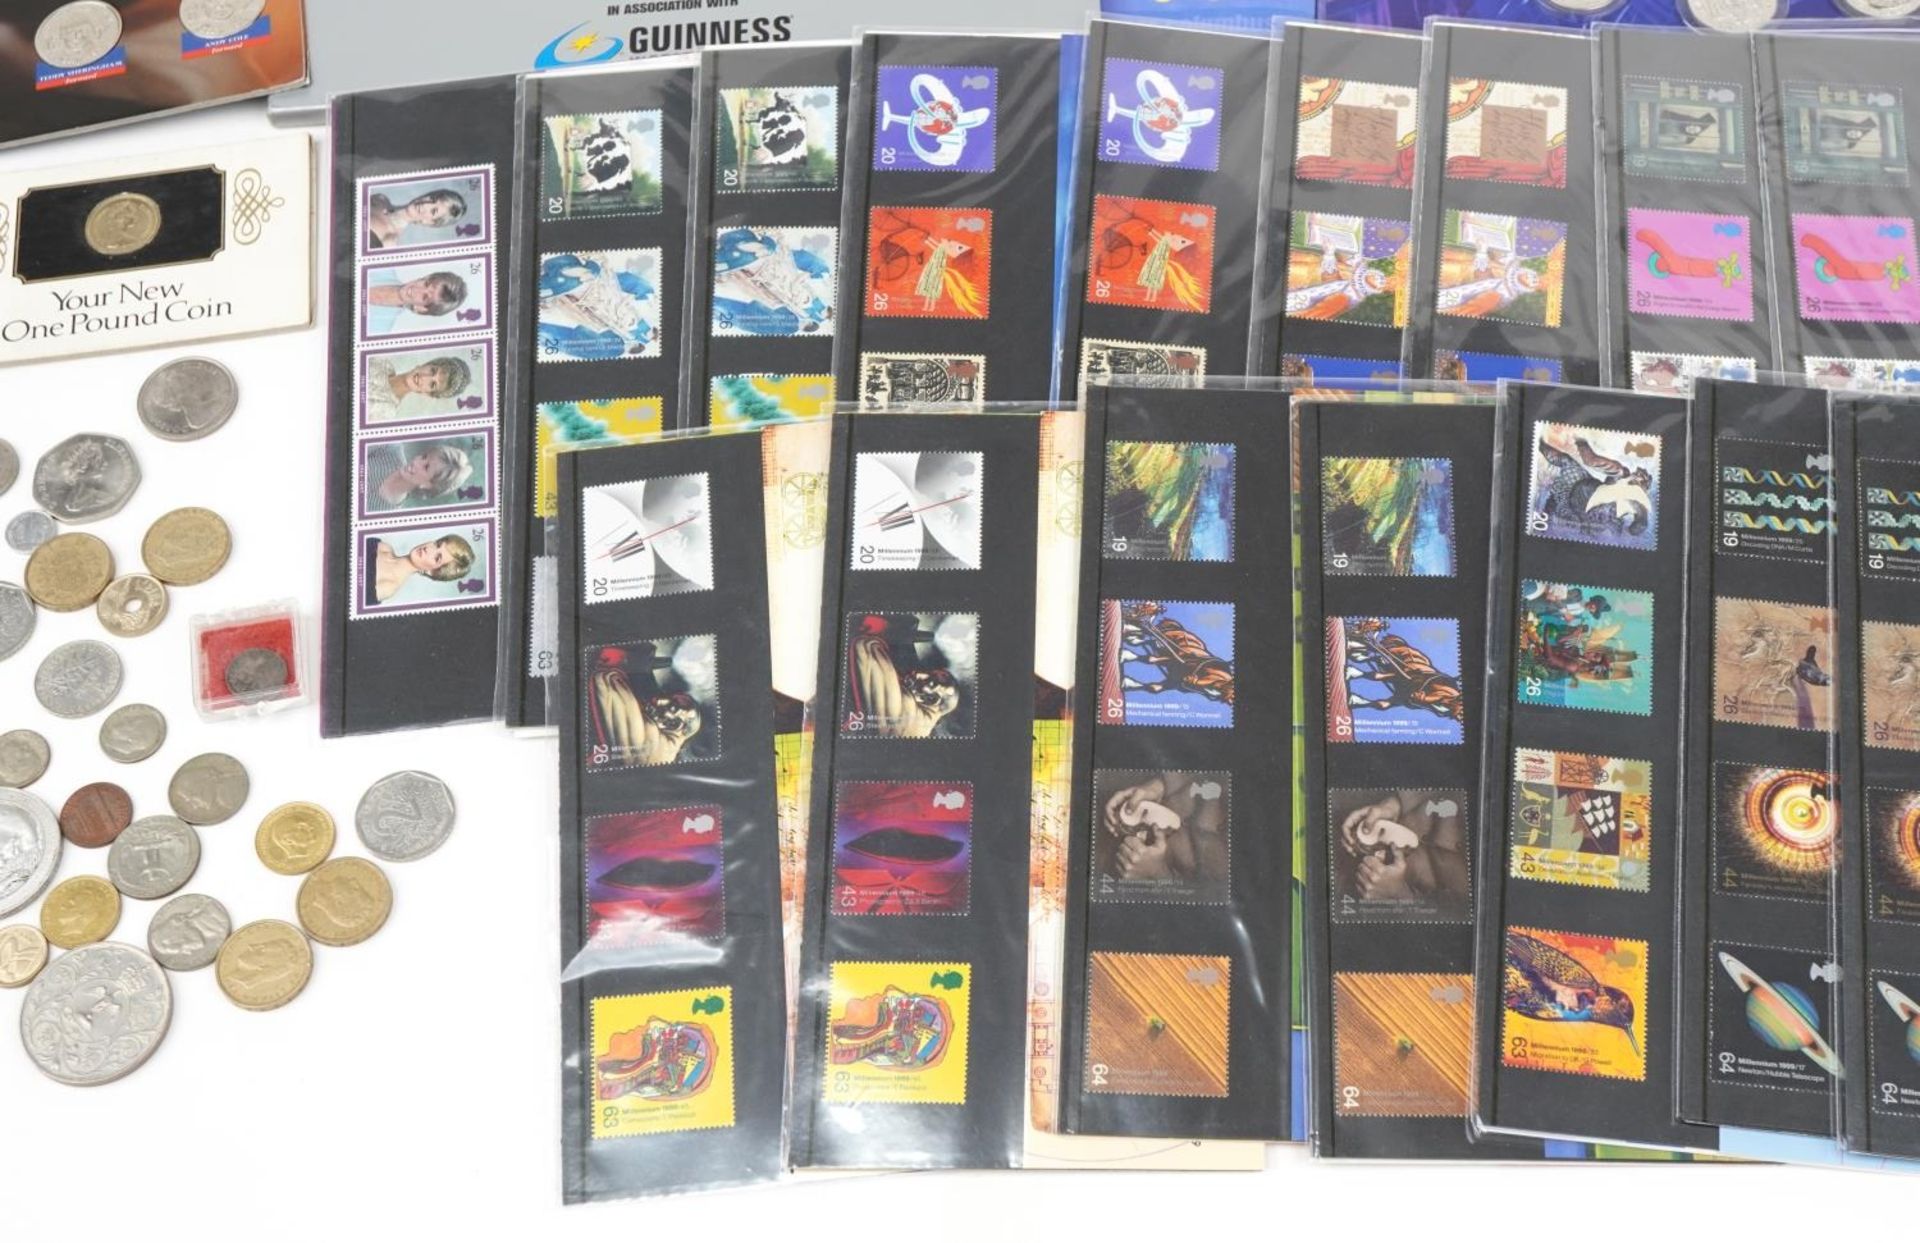 Coins, stamps and related ephemera including Royal Mint presentation packs and Sainsbury's Makers of - Image 6 of 7